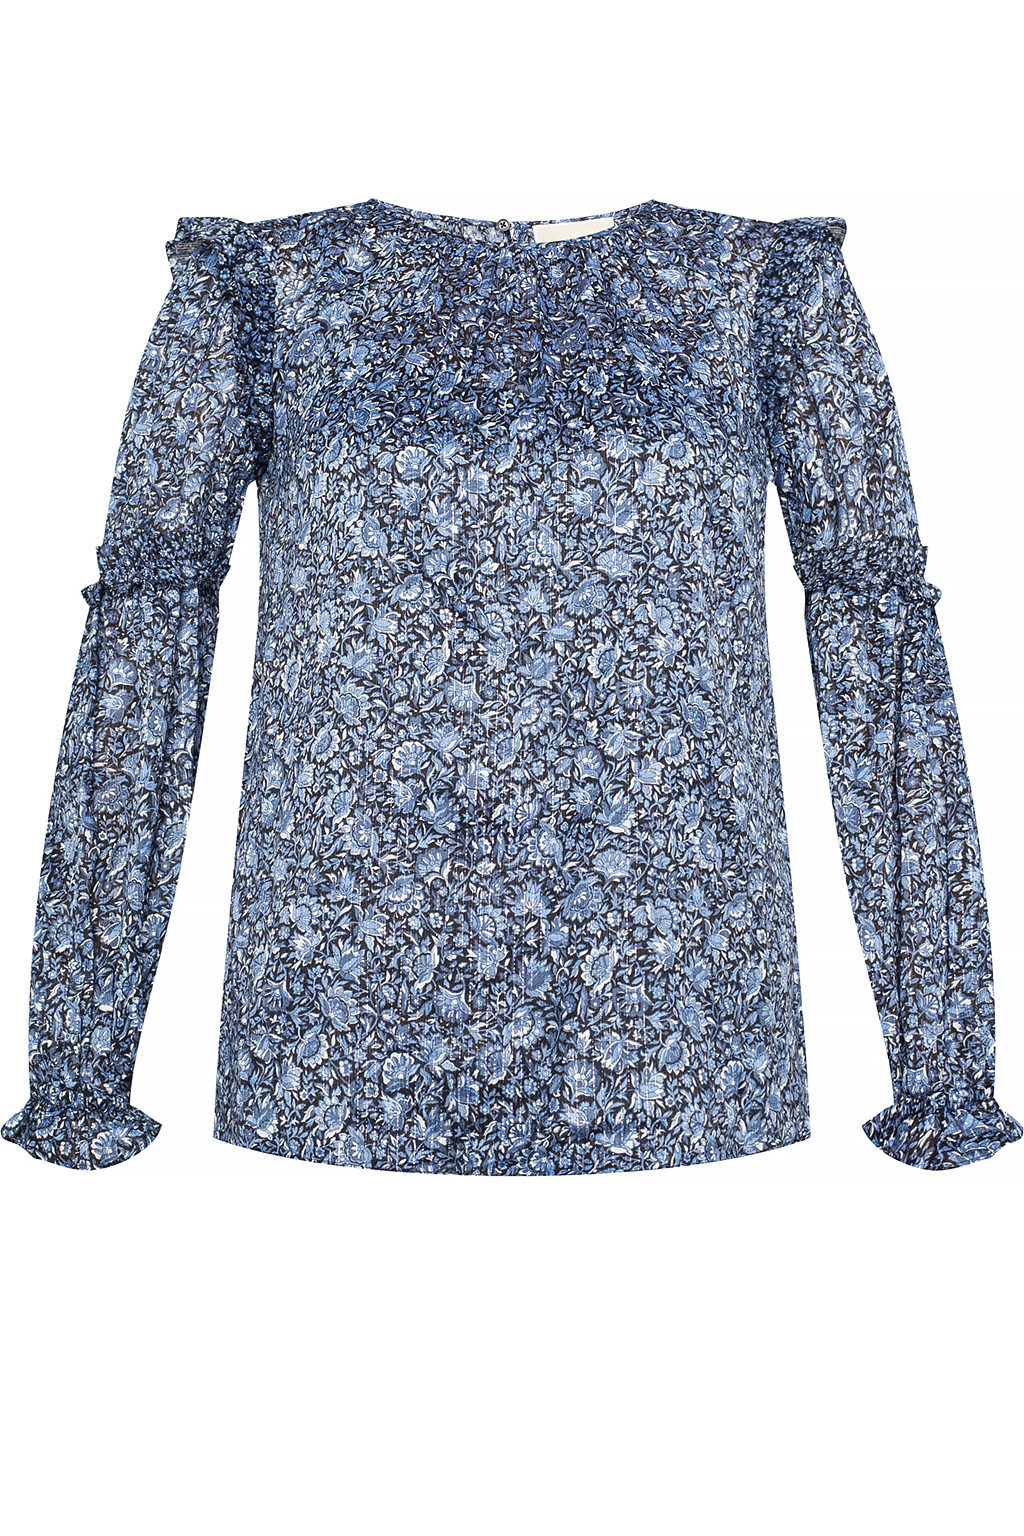 Michael Michael Kors Patterned top with lurex thread